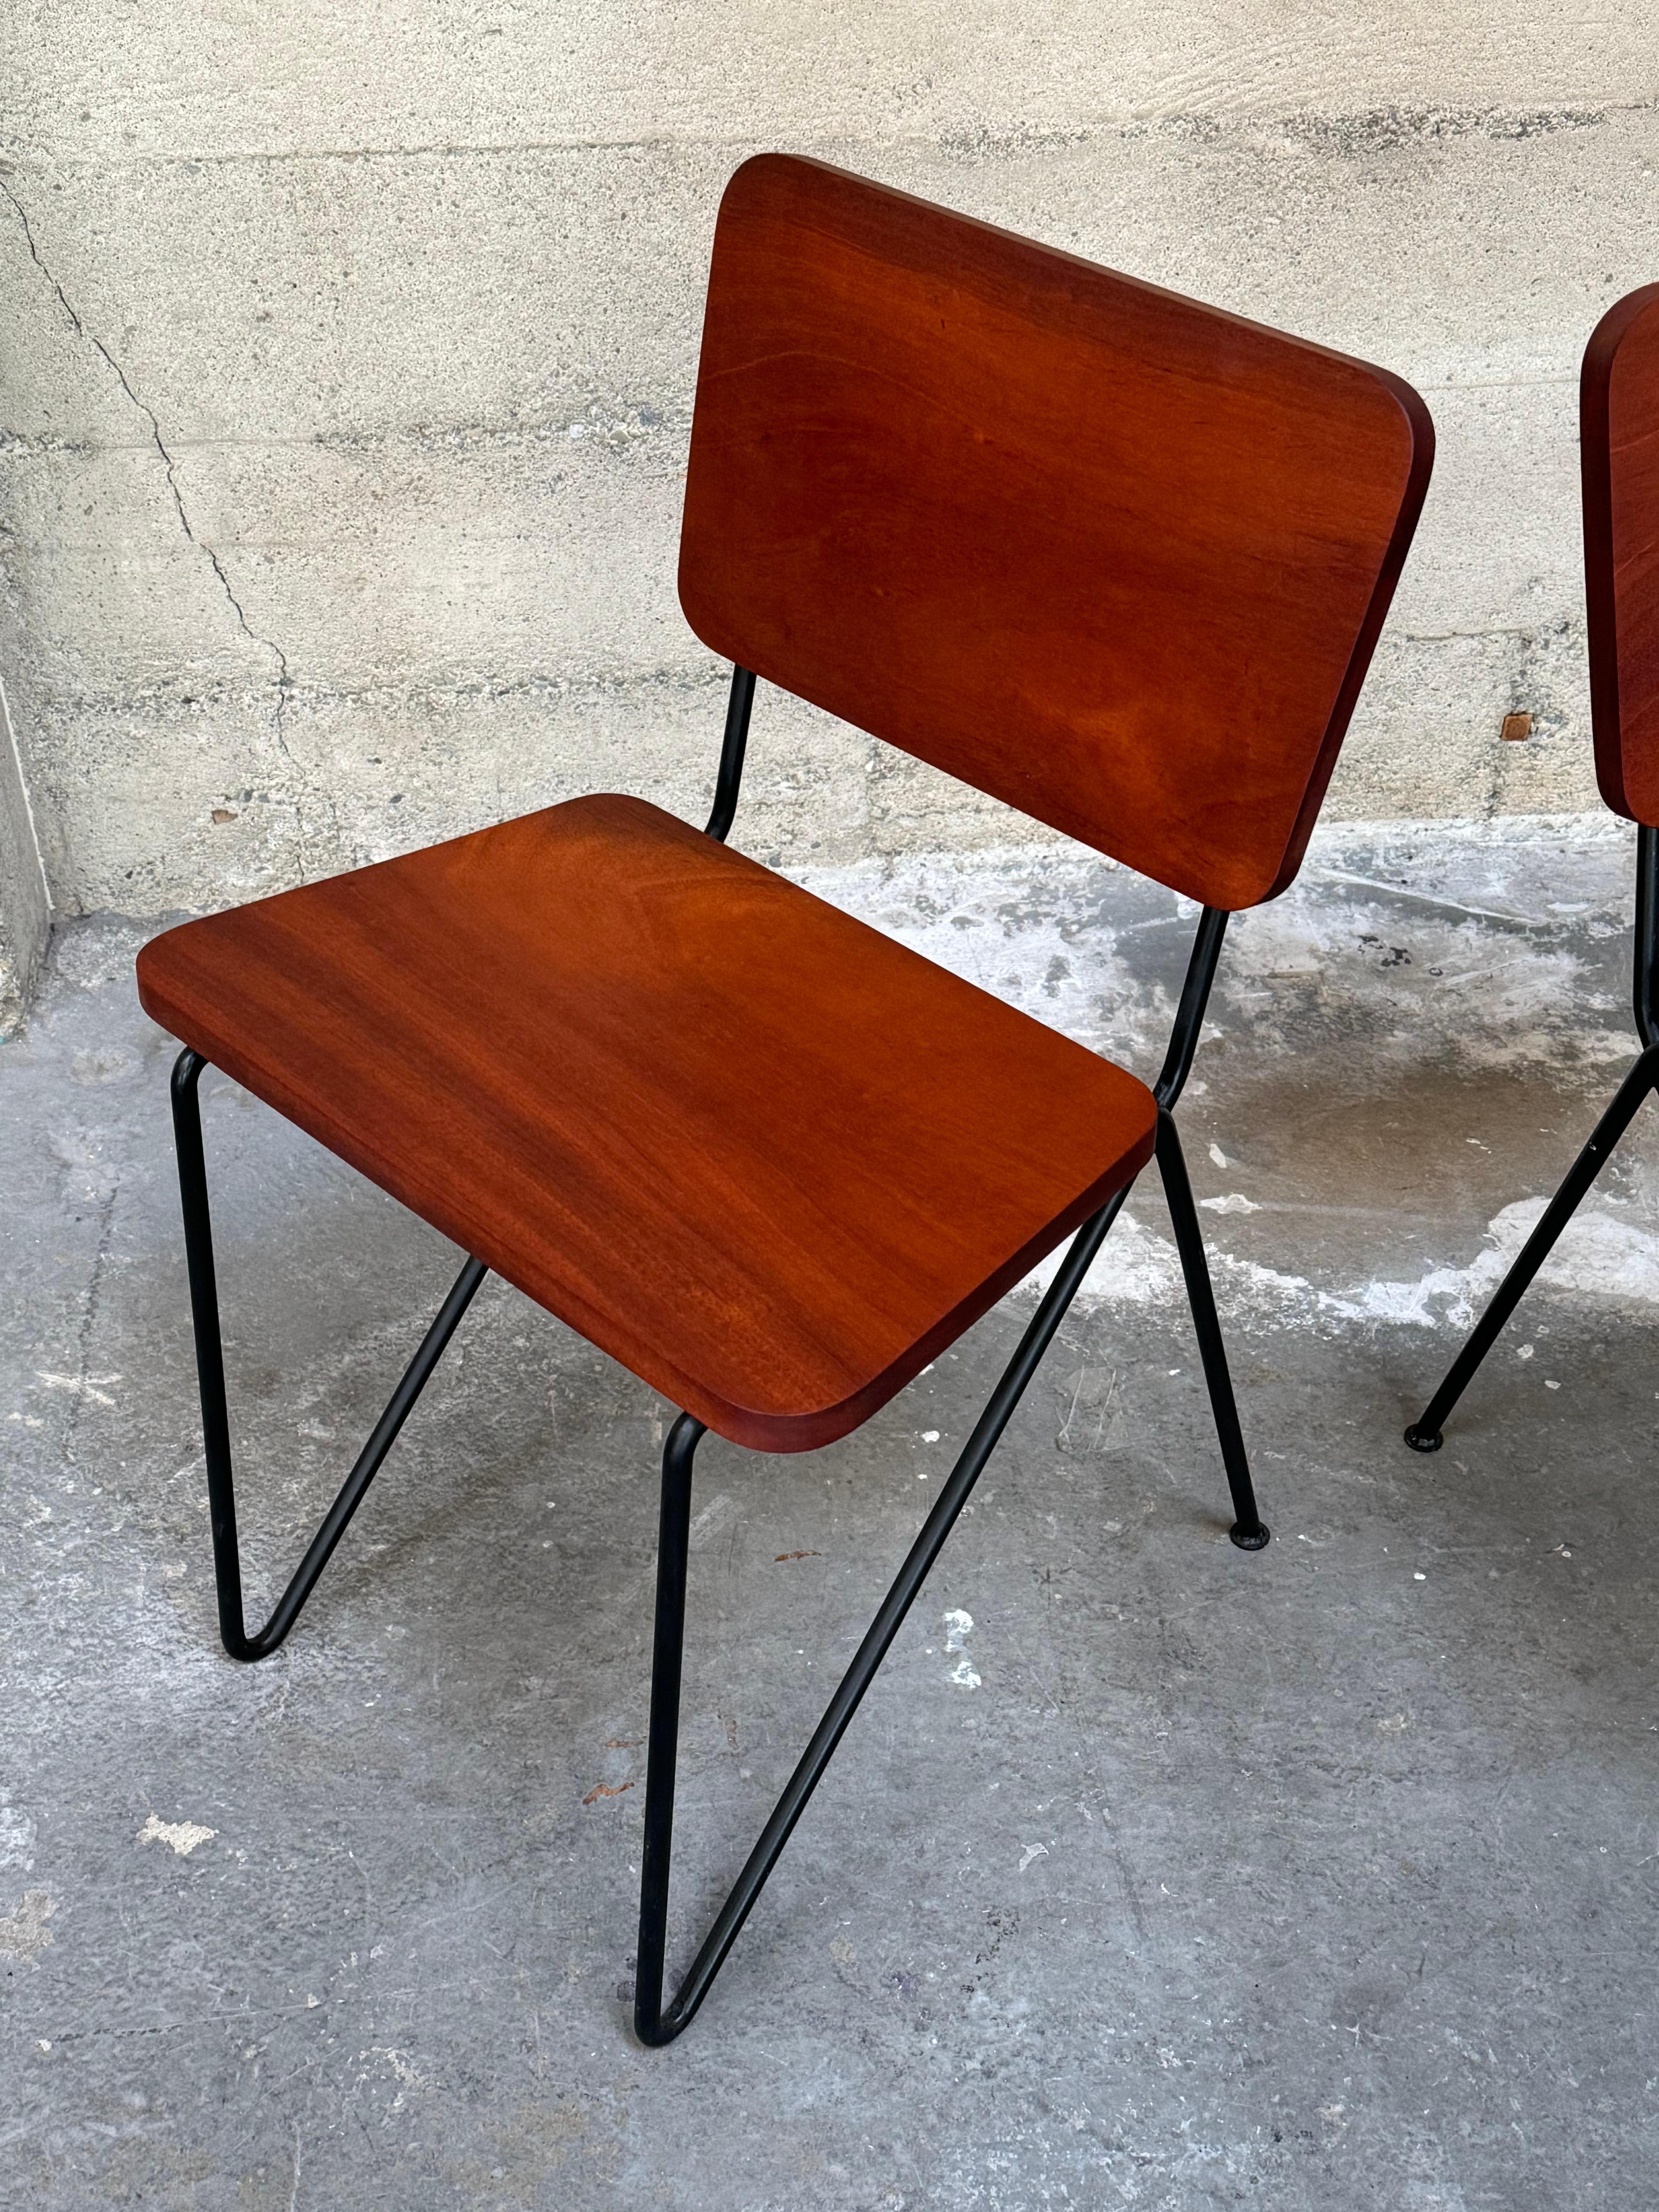 Pair of 1950s California Design Iron and Tropical Hardwood Side Chairs In Good Condition For Sale In Oakland, CA